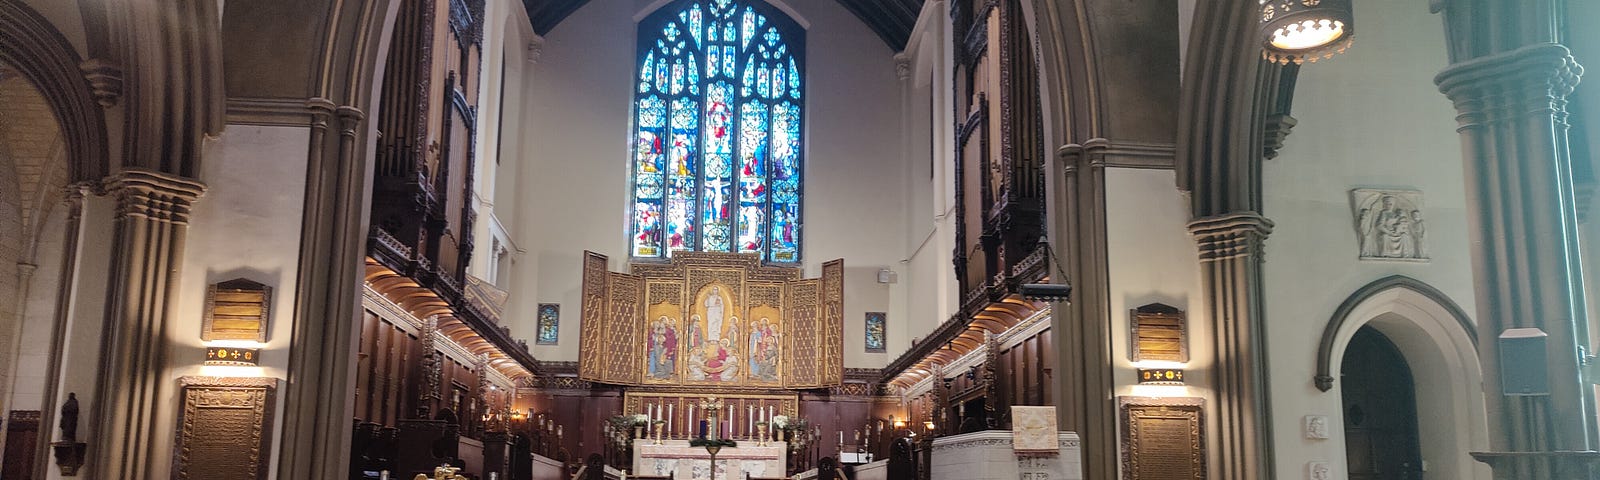 The chancel of a neo-gothic church.